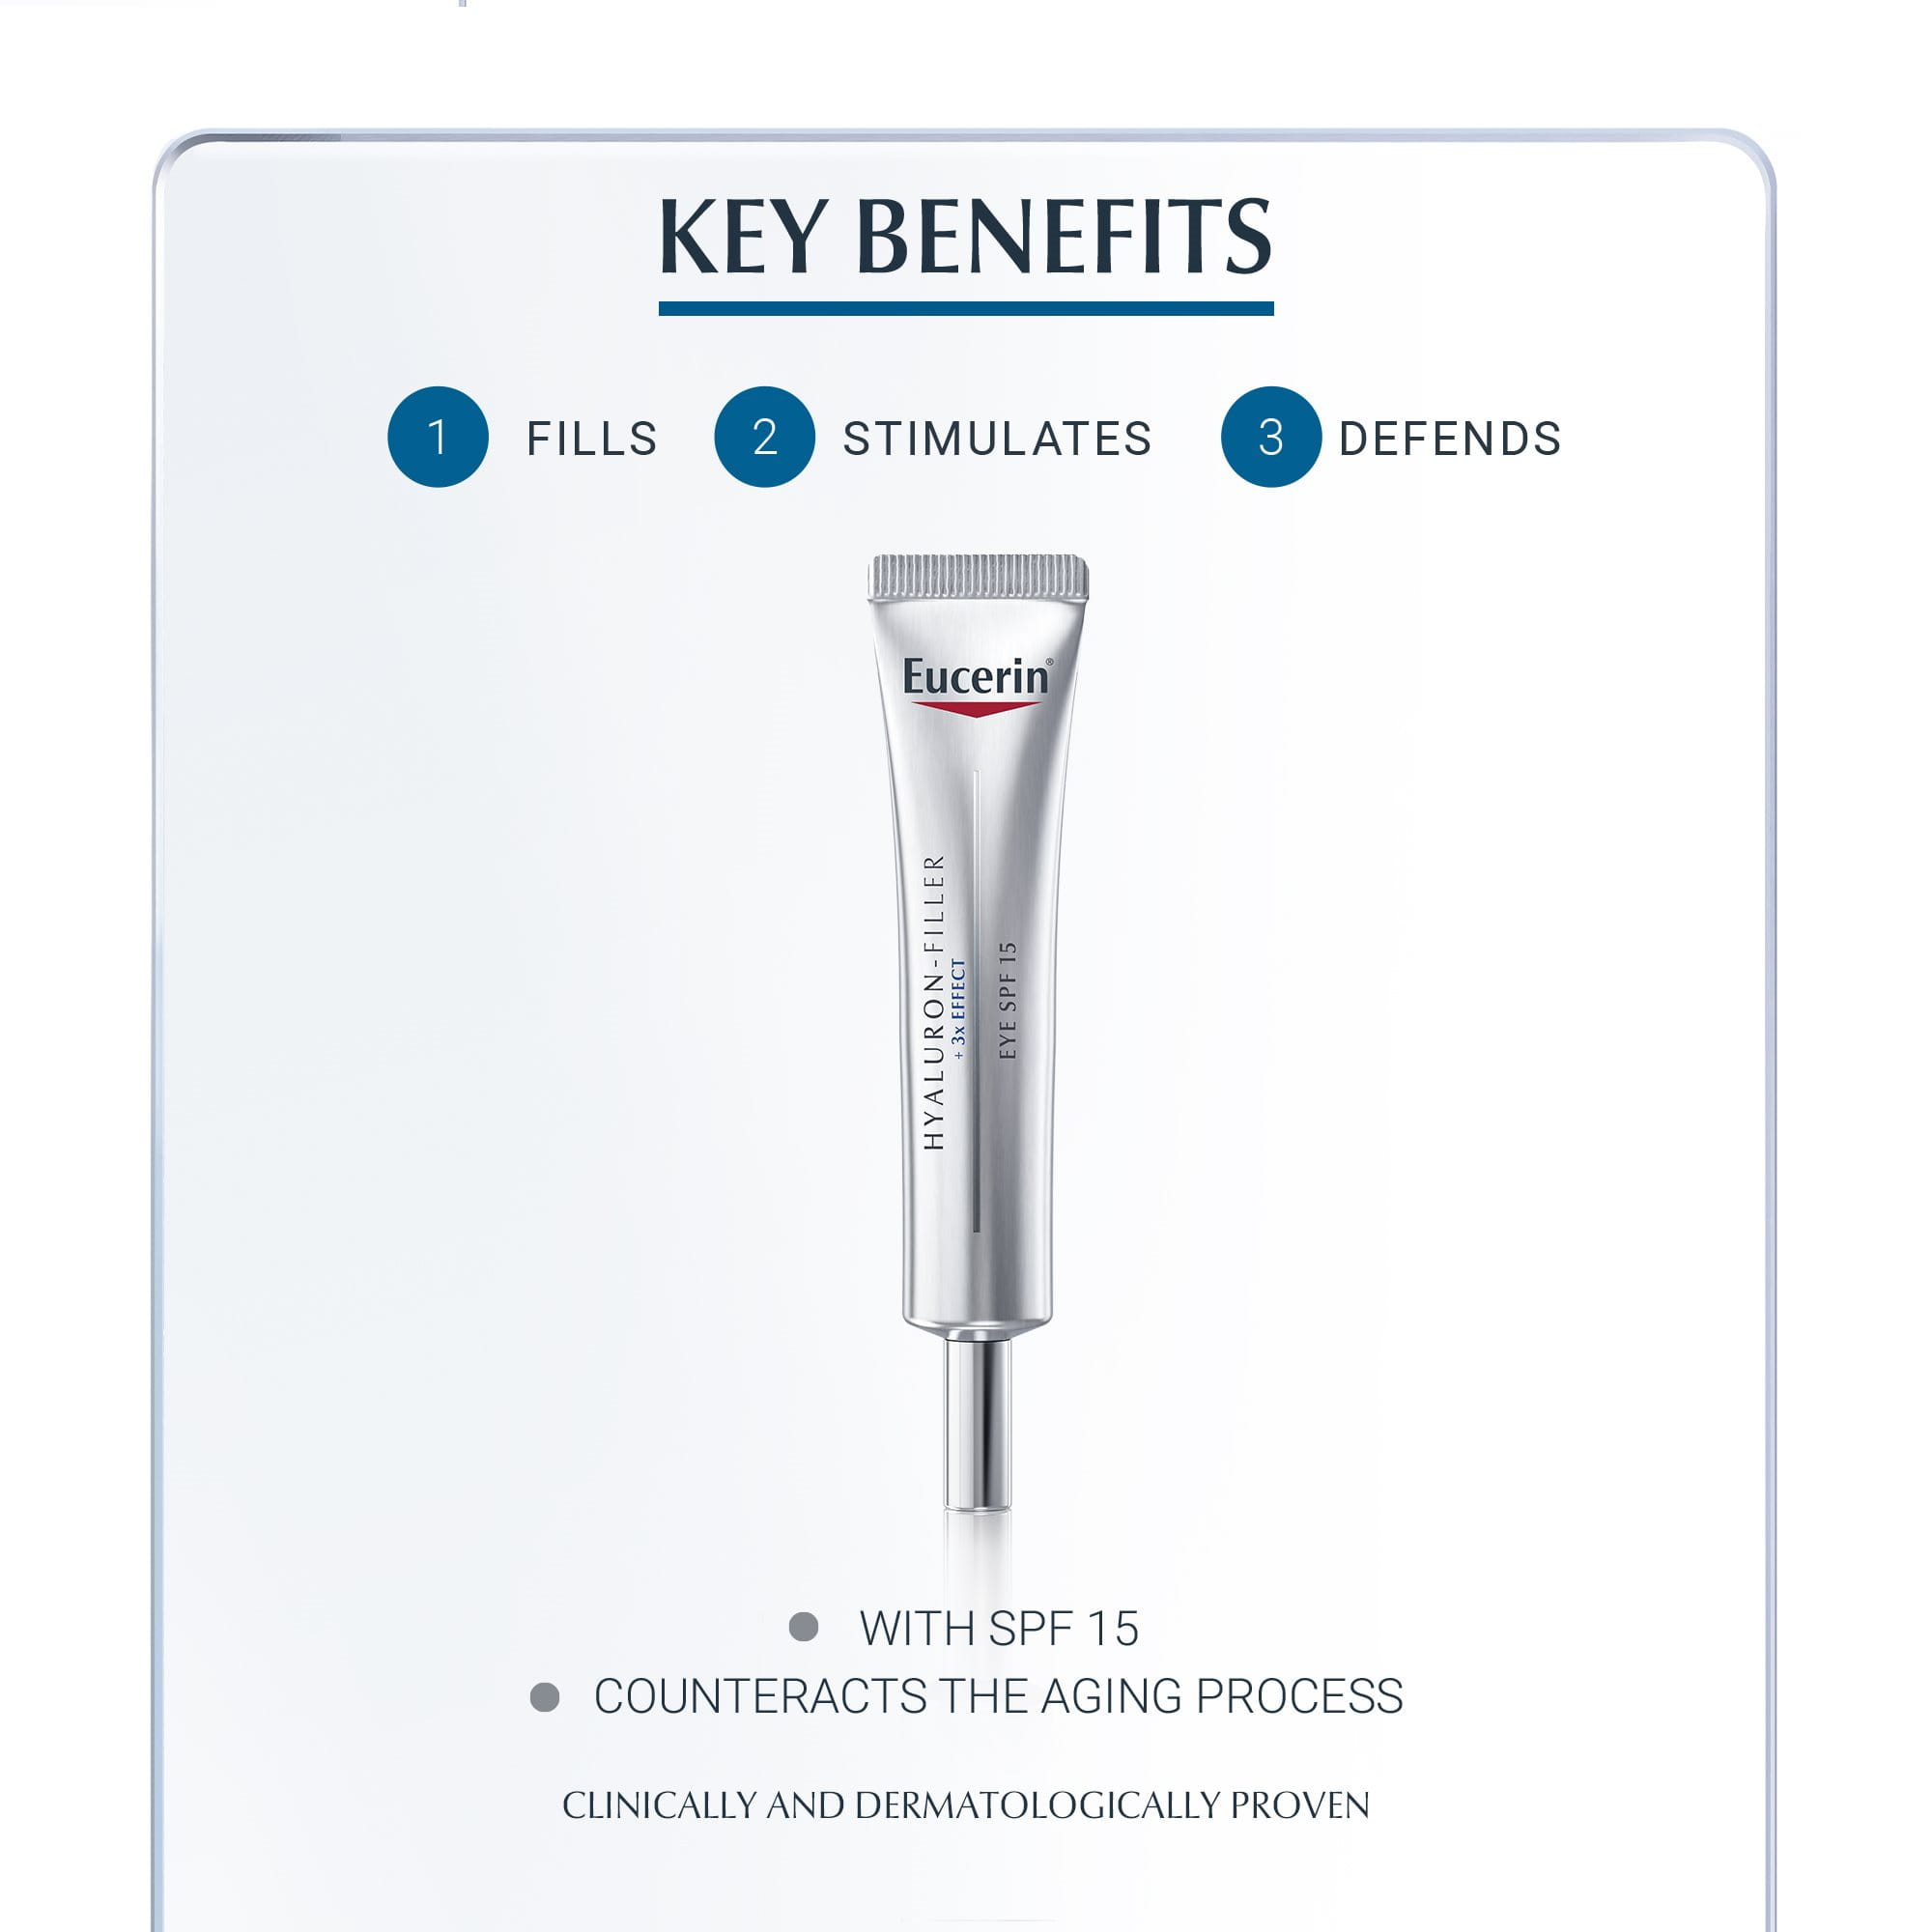 Koncession Hovedgade Andrew Halliday Eucerin Hyaluron Filler Eye SPF 15 is an anti-wrinkle eye cream for all  skin types. It plumps up fine lines and wrinkles in the delicate eye area.